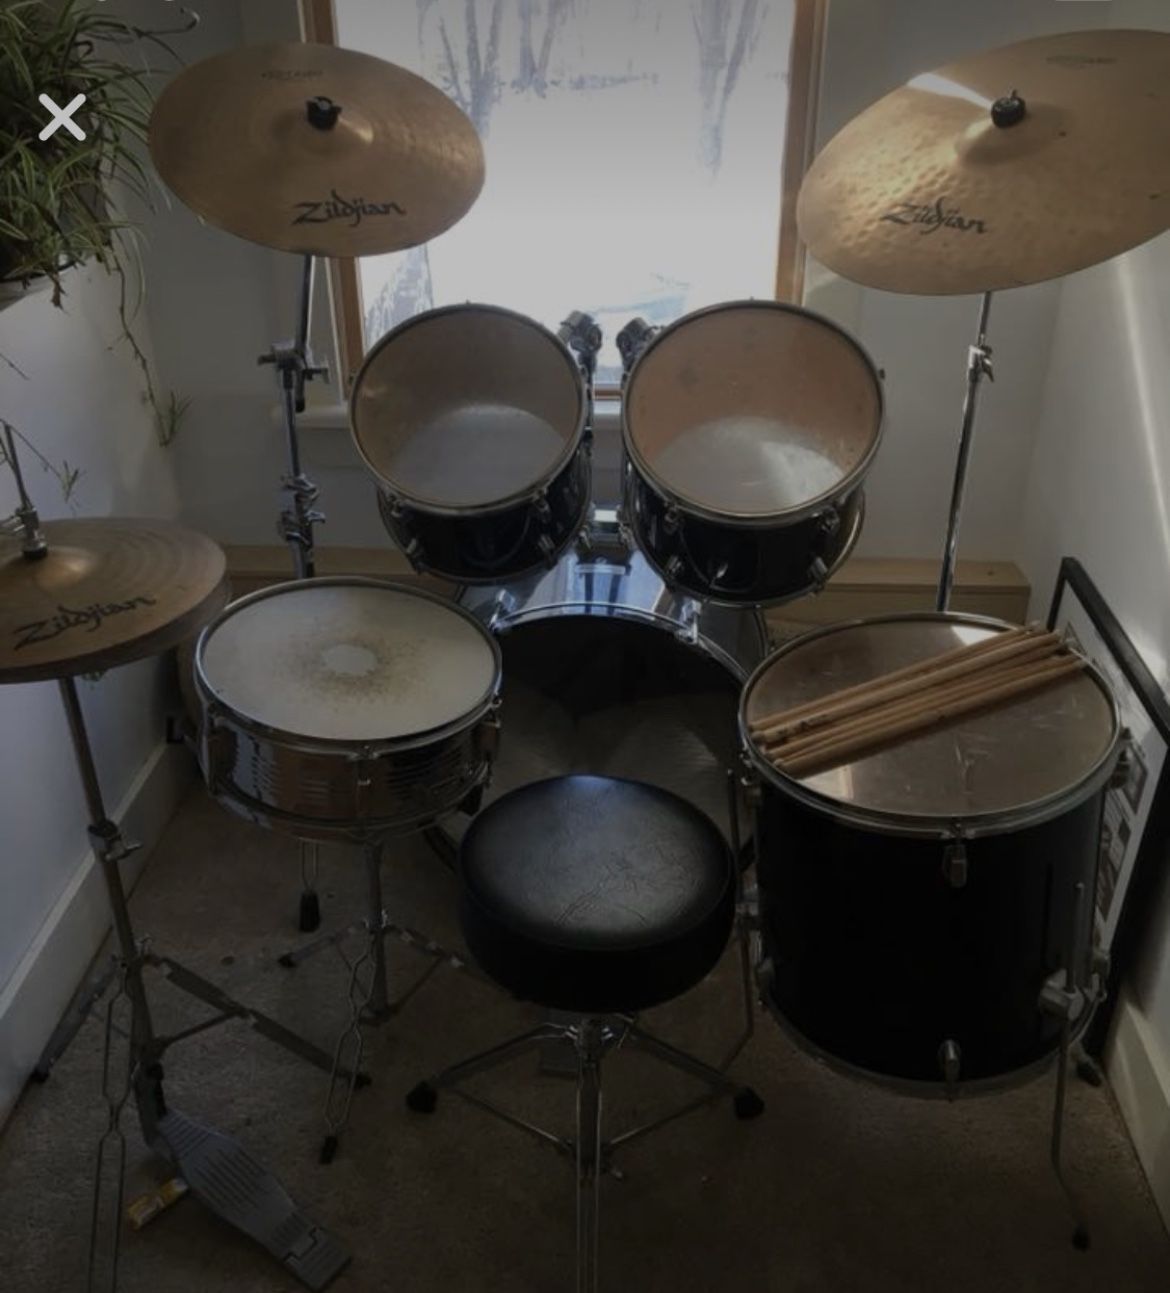 Sound Percussion Drum Set with Zildjian Cymbals